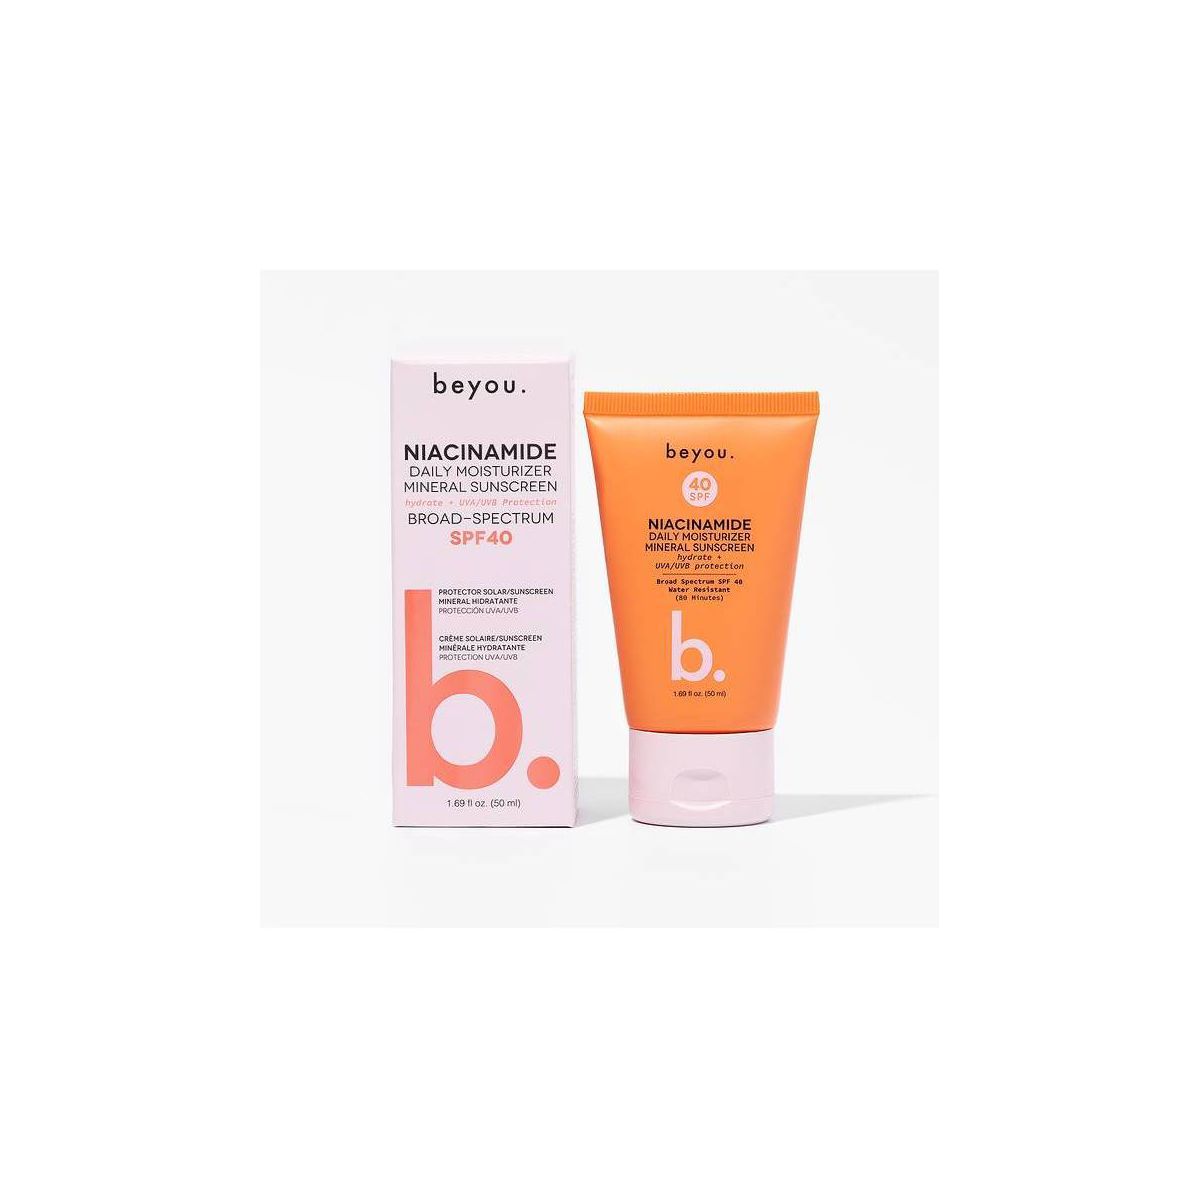 Beyou. Hydrating Niacinamide Daily Moisturizer Mineral Face Sunscreen - SPF 40 - 1.69 fl oz | Target